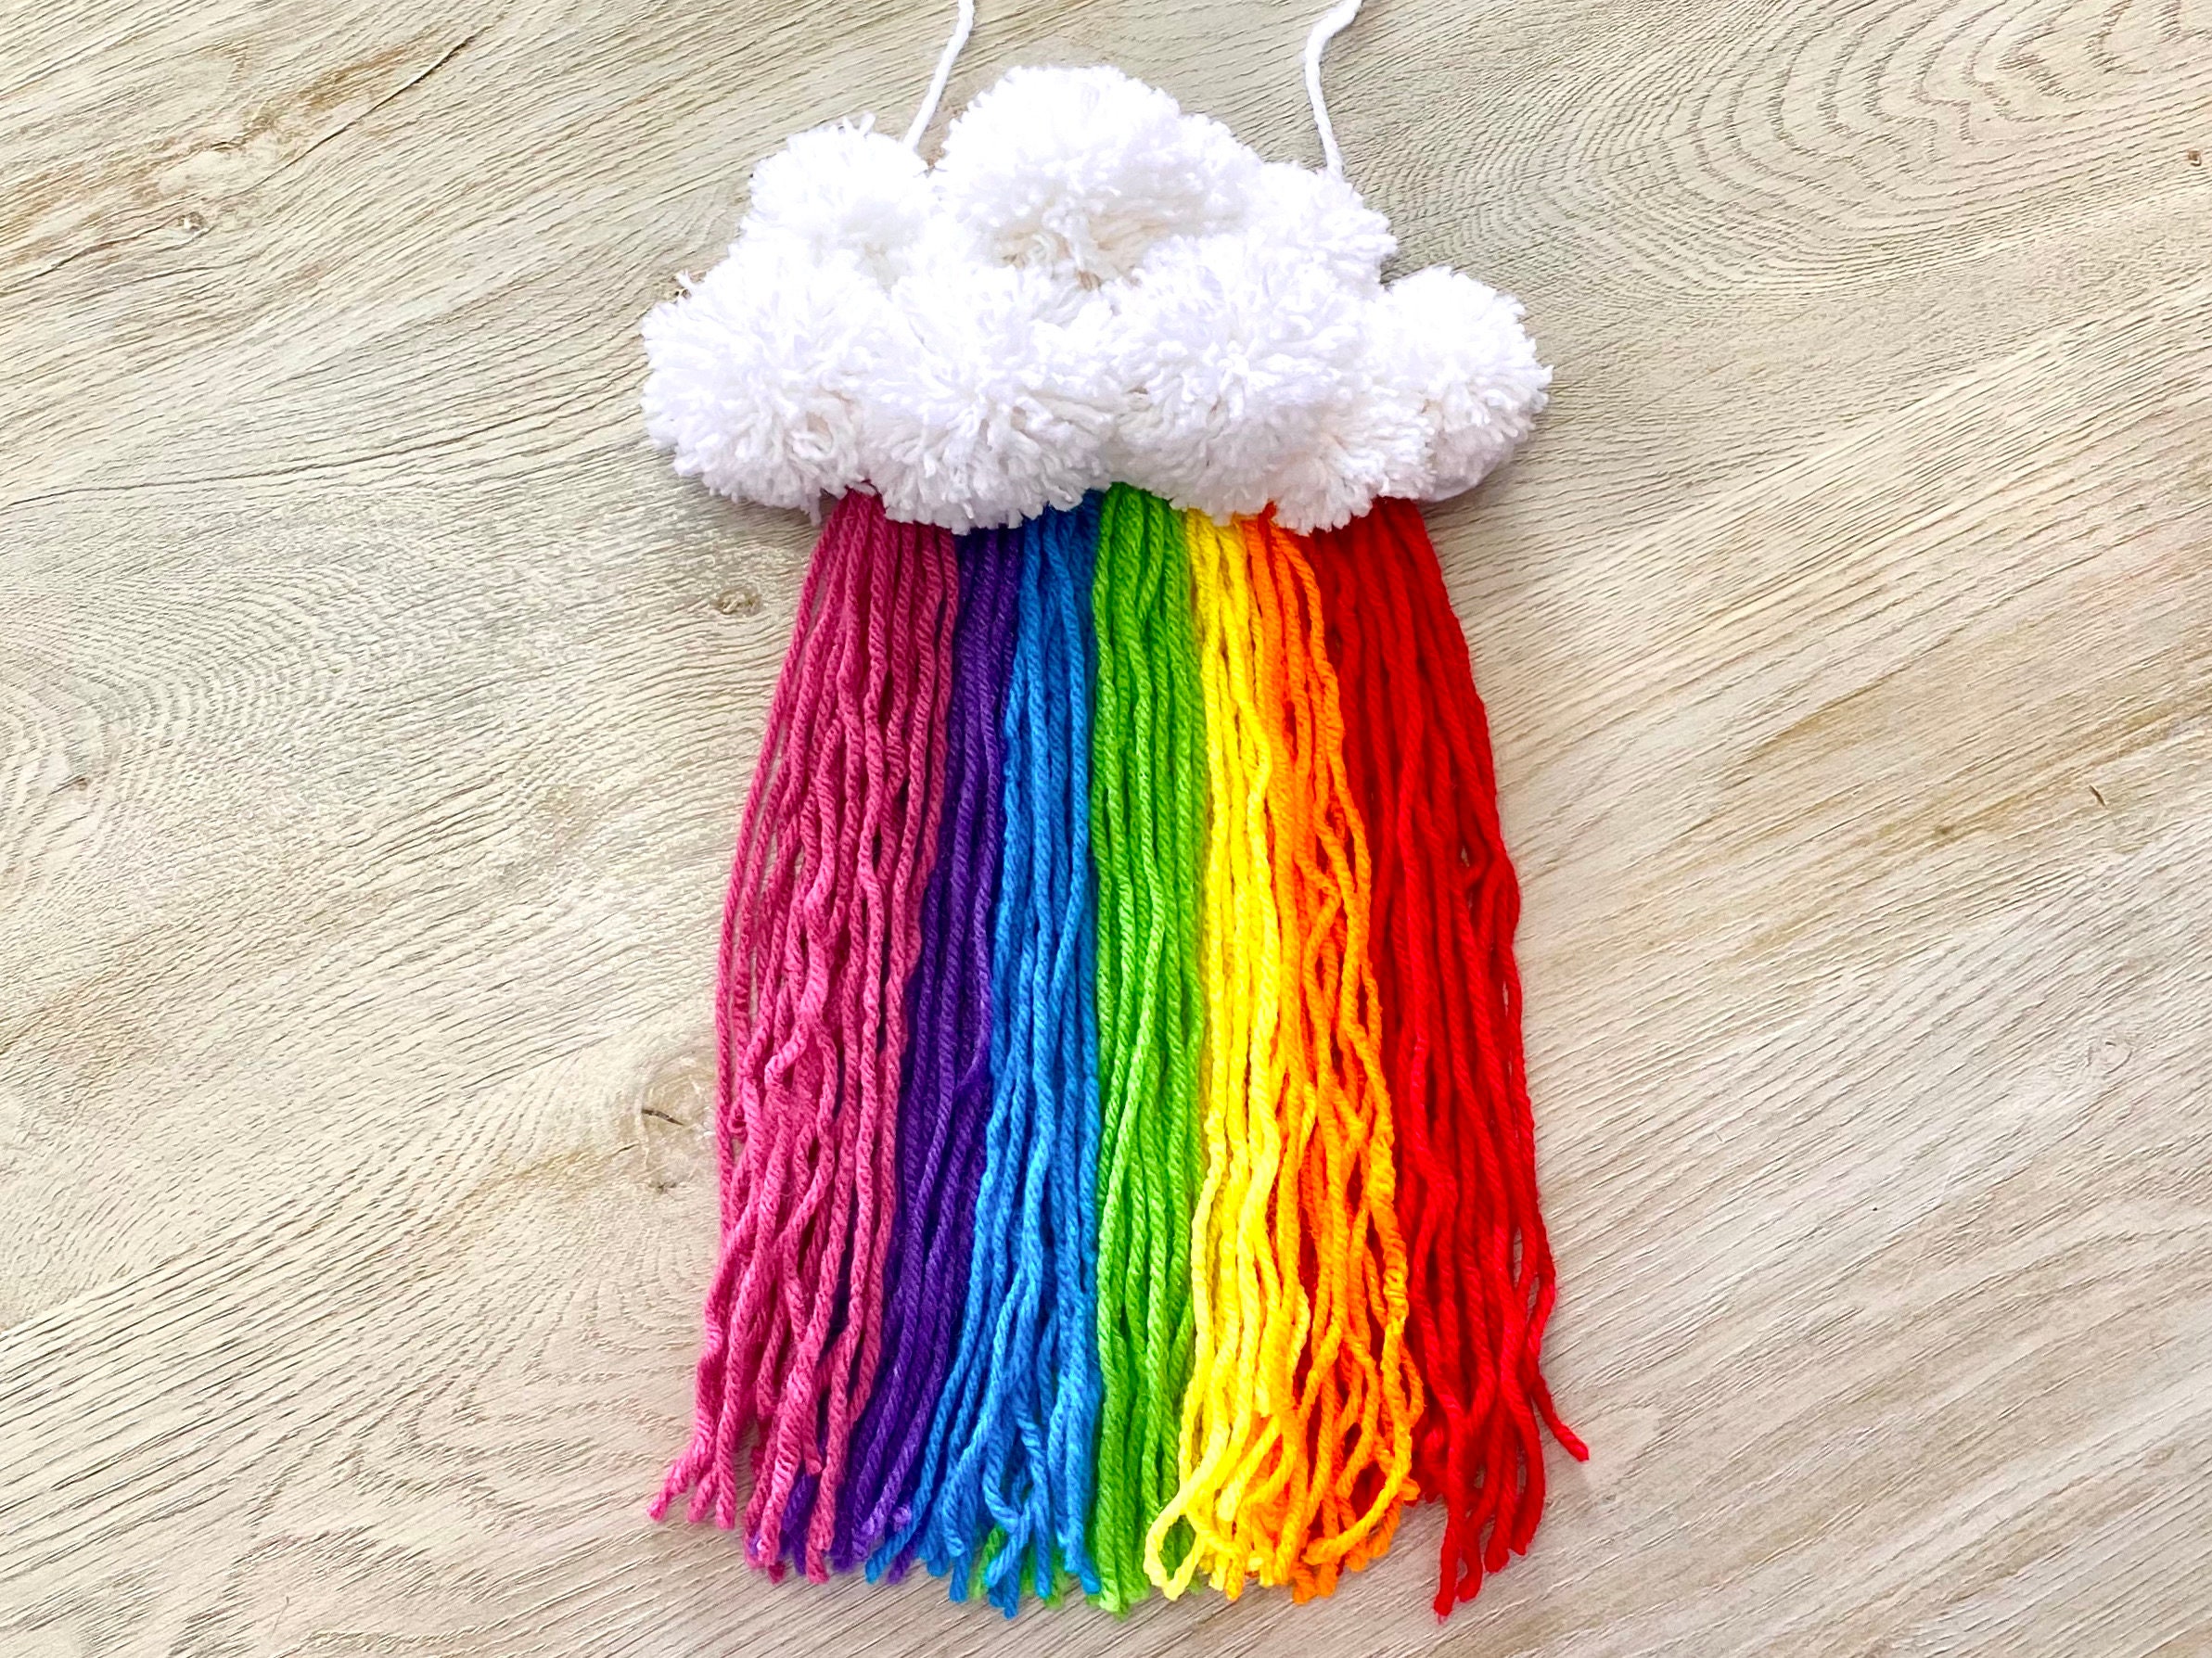 Rainbow Embroidery Kit for Kids, First Cross Stitch Project, DIY